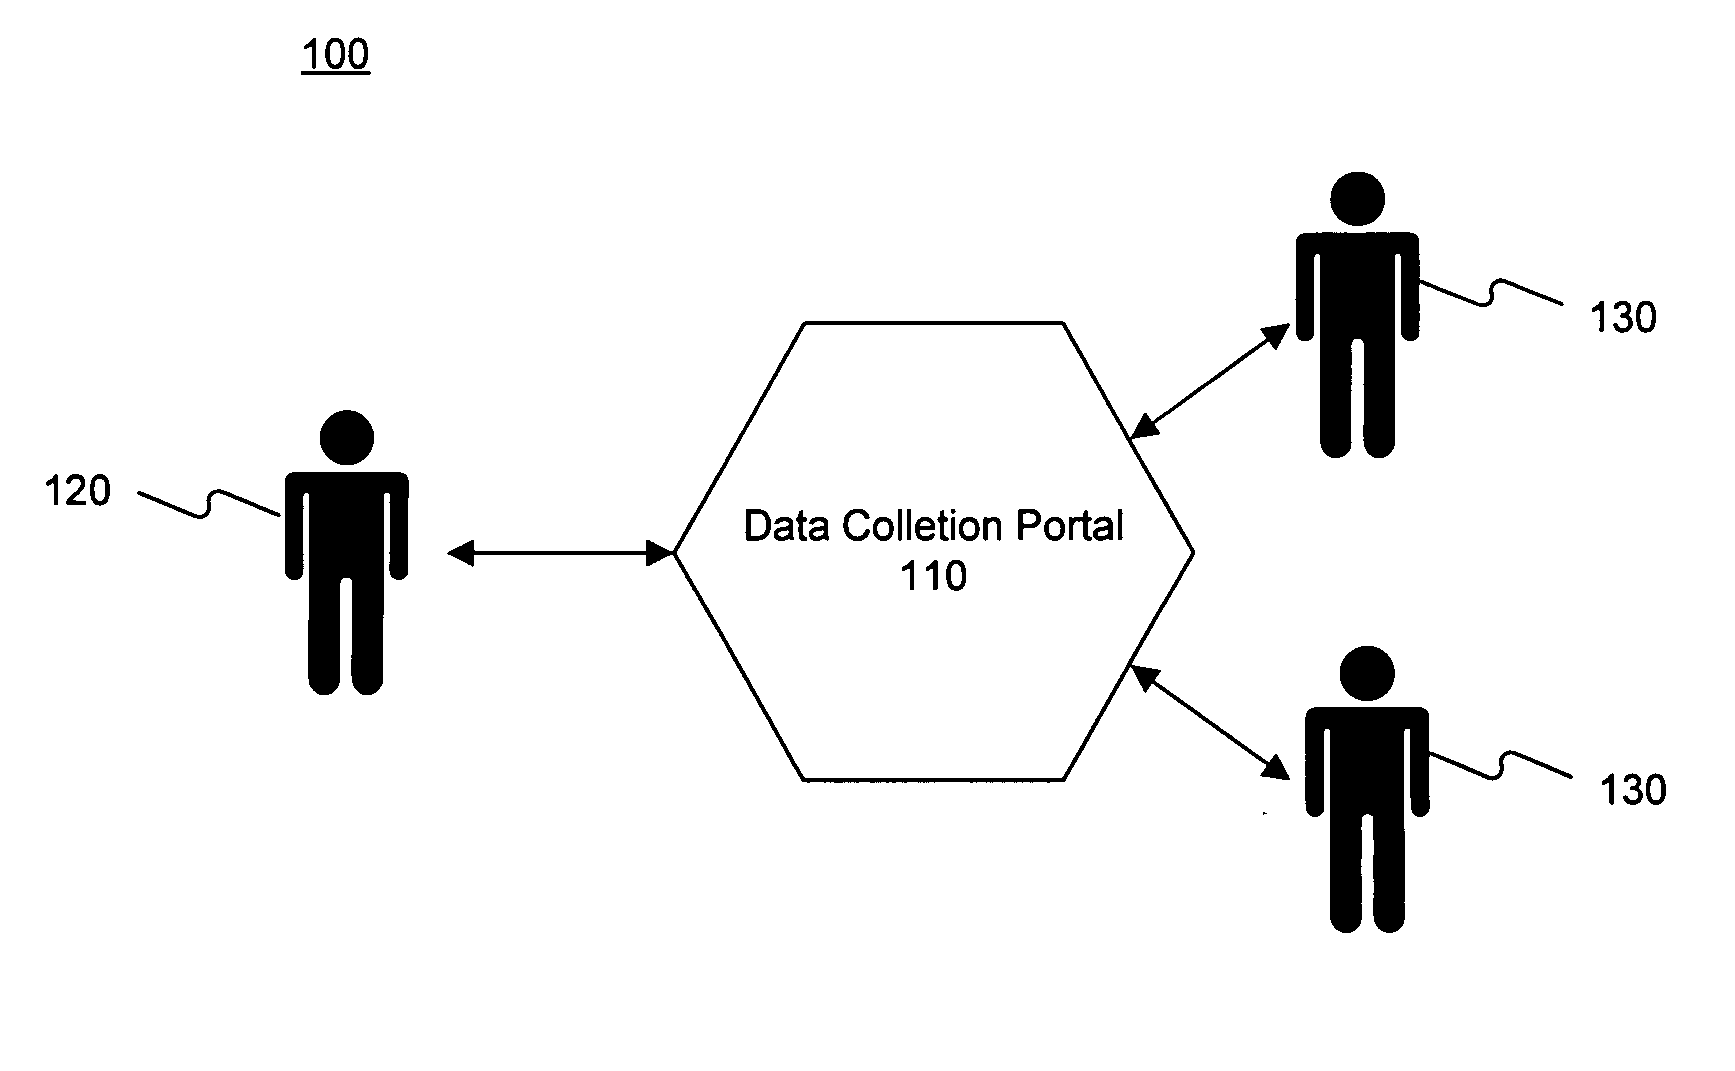 Systems and methods for organizing and monitoring data collection